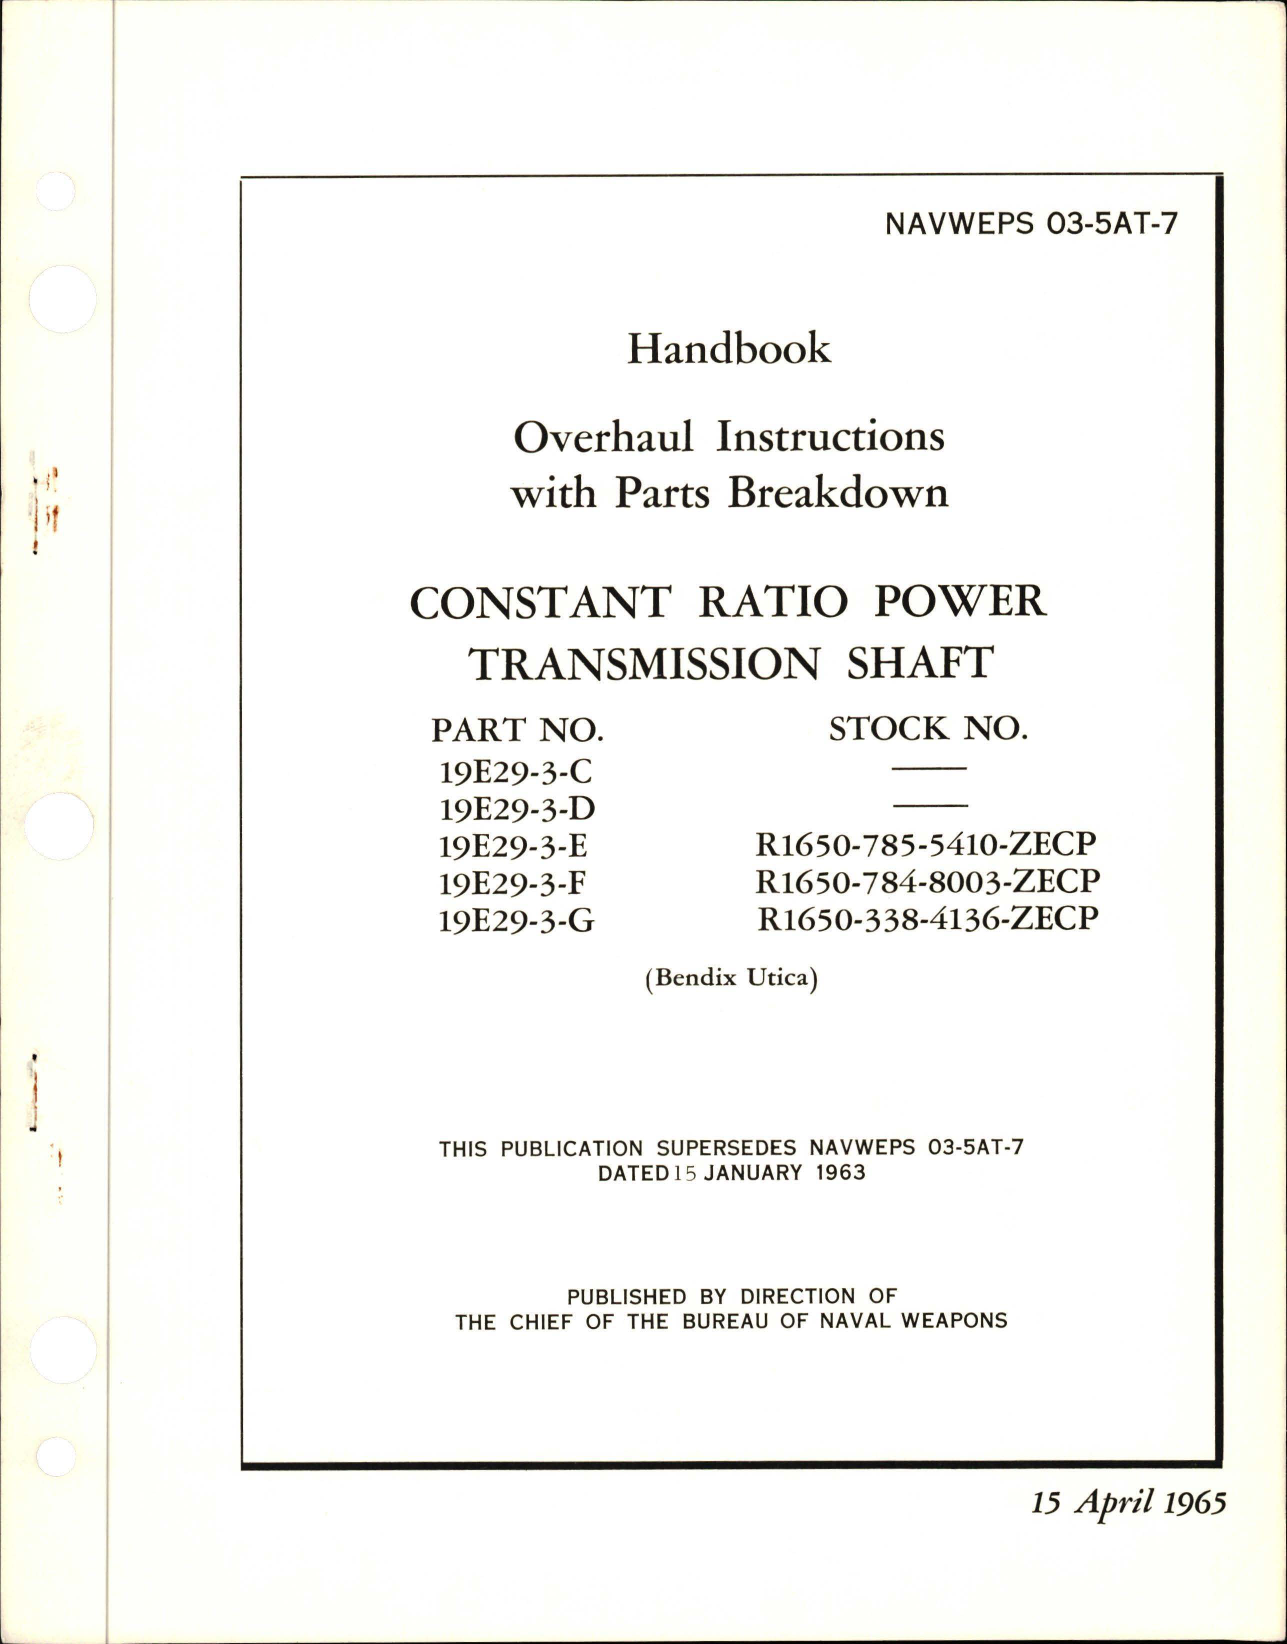 Sample page 1 from AirCorps Library document: Overhaul Instructions with Parts Breakdown for Constant Ratio Power Transmission Shaft 